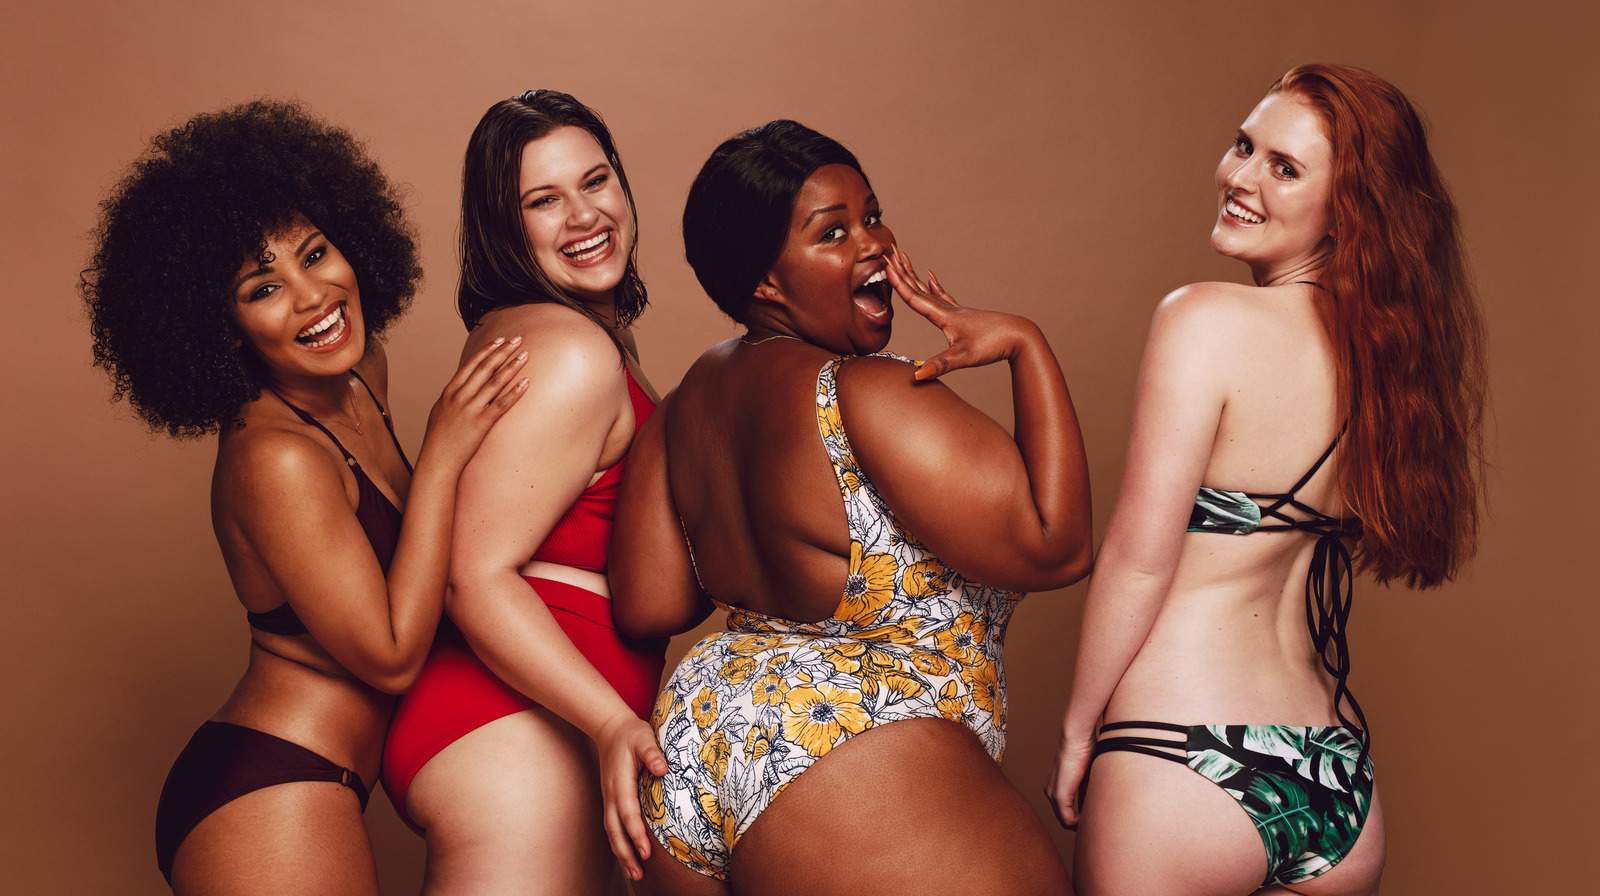 The Best Bathing Suit For Your Body Type